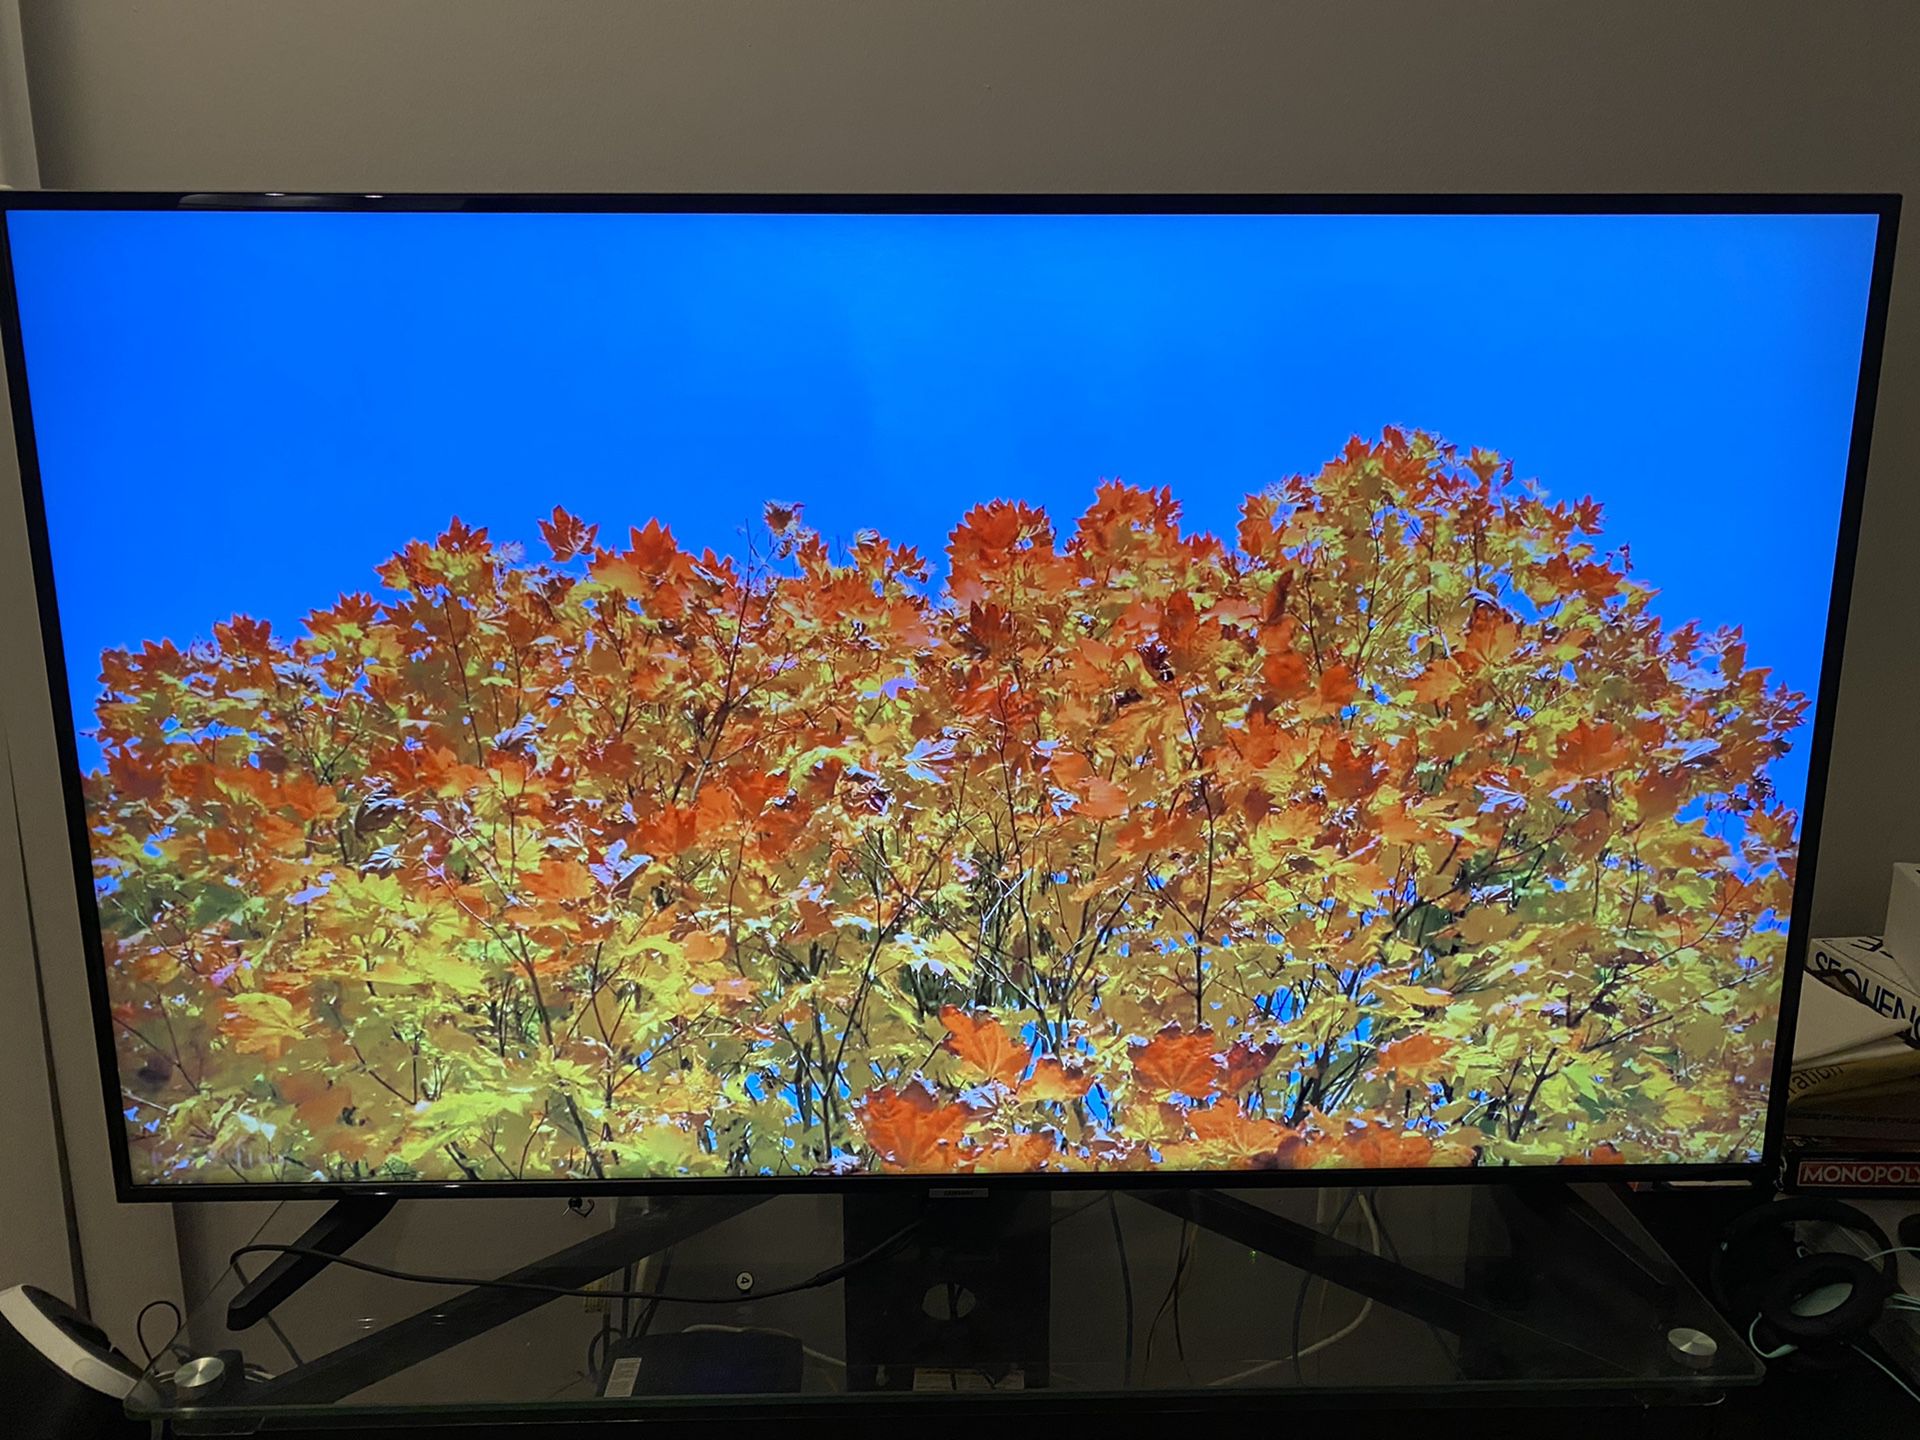 Samsung 55 NU6900 Series - 2160p - Smart - 4K UHD TV with HDR